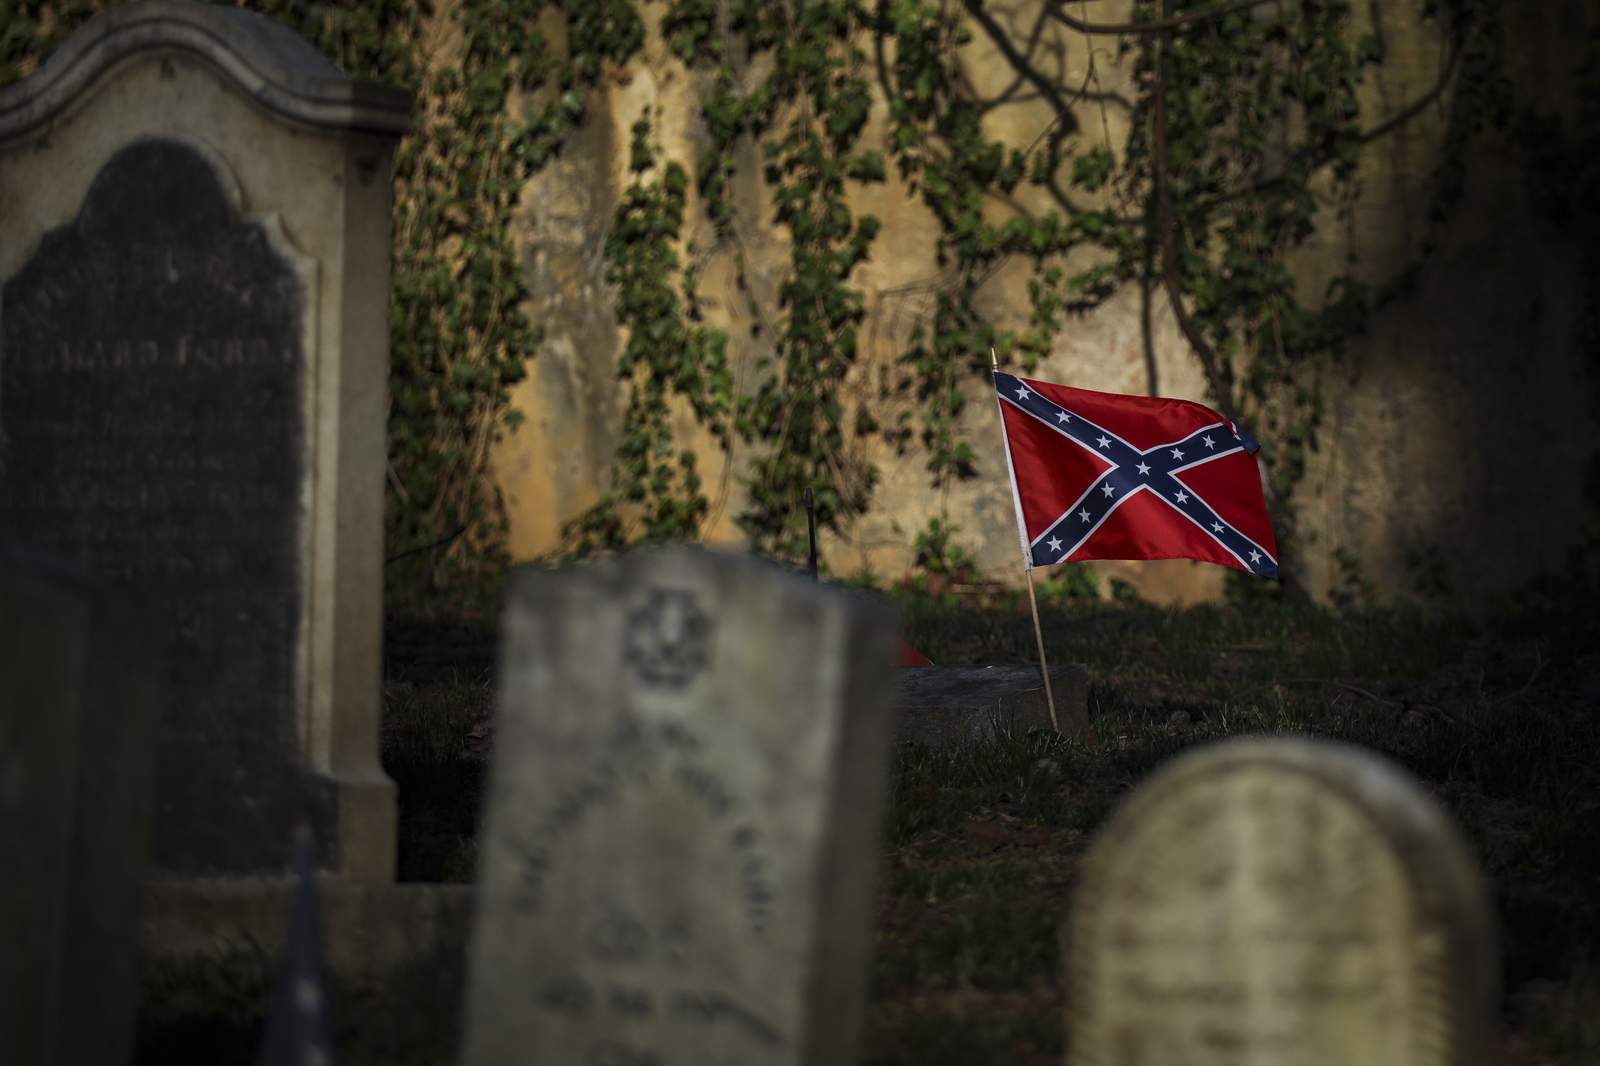 $200,000 worth of damage done to presidents, Confederate graves at Virginia cemetery